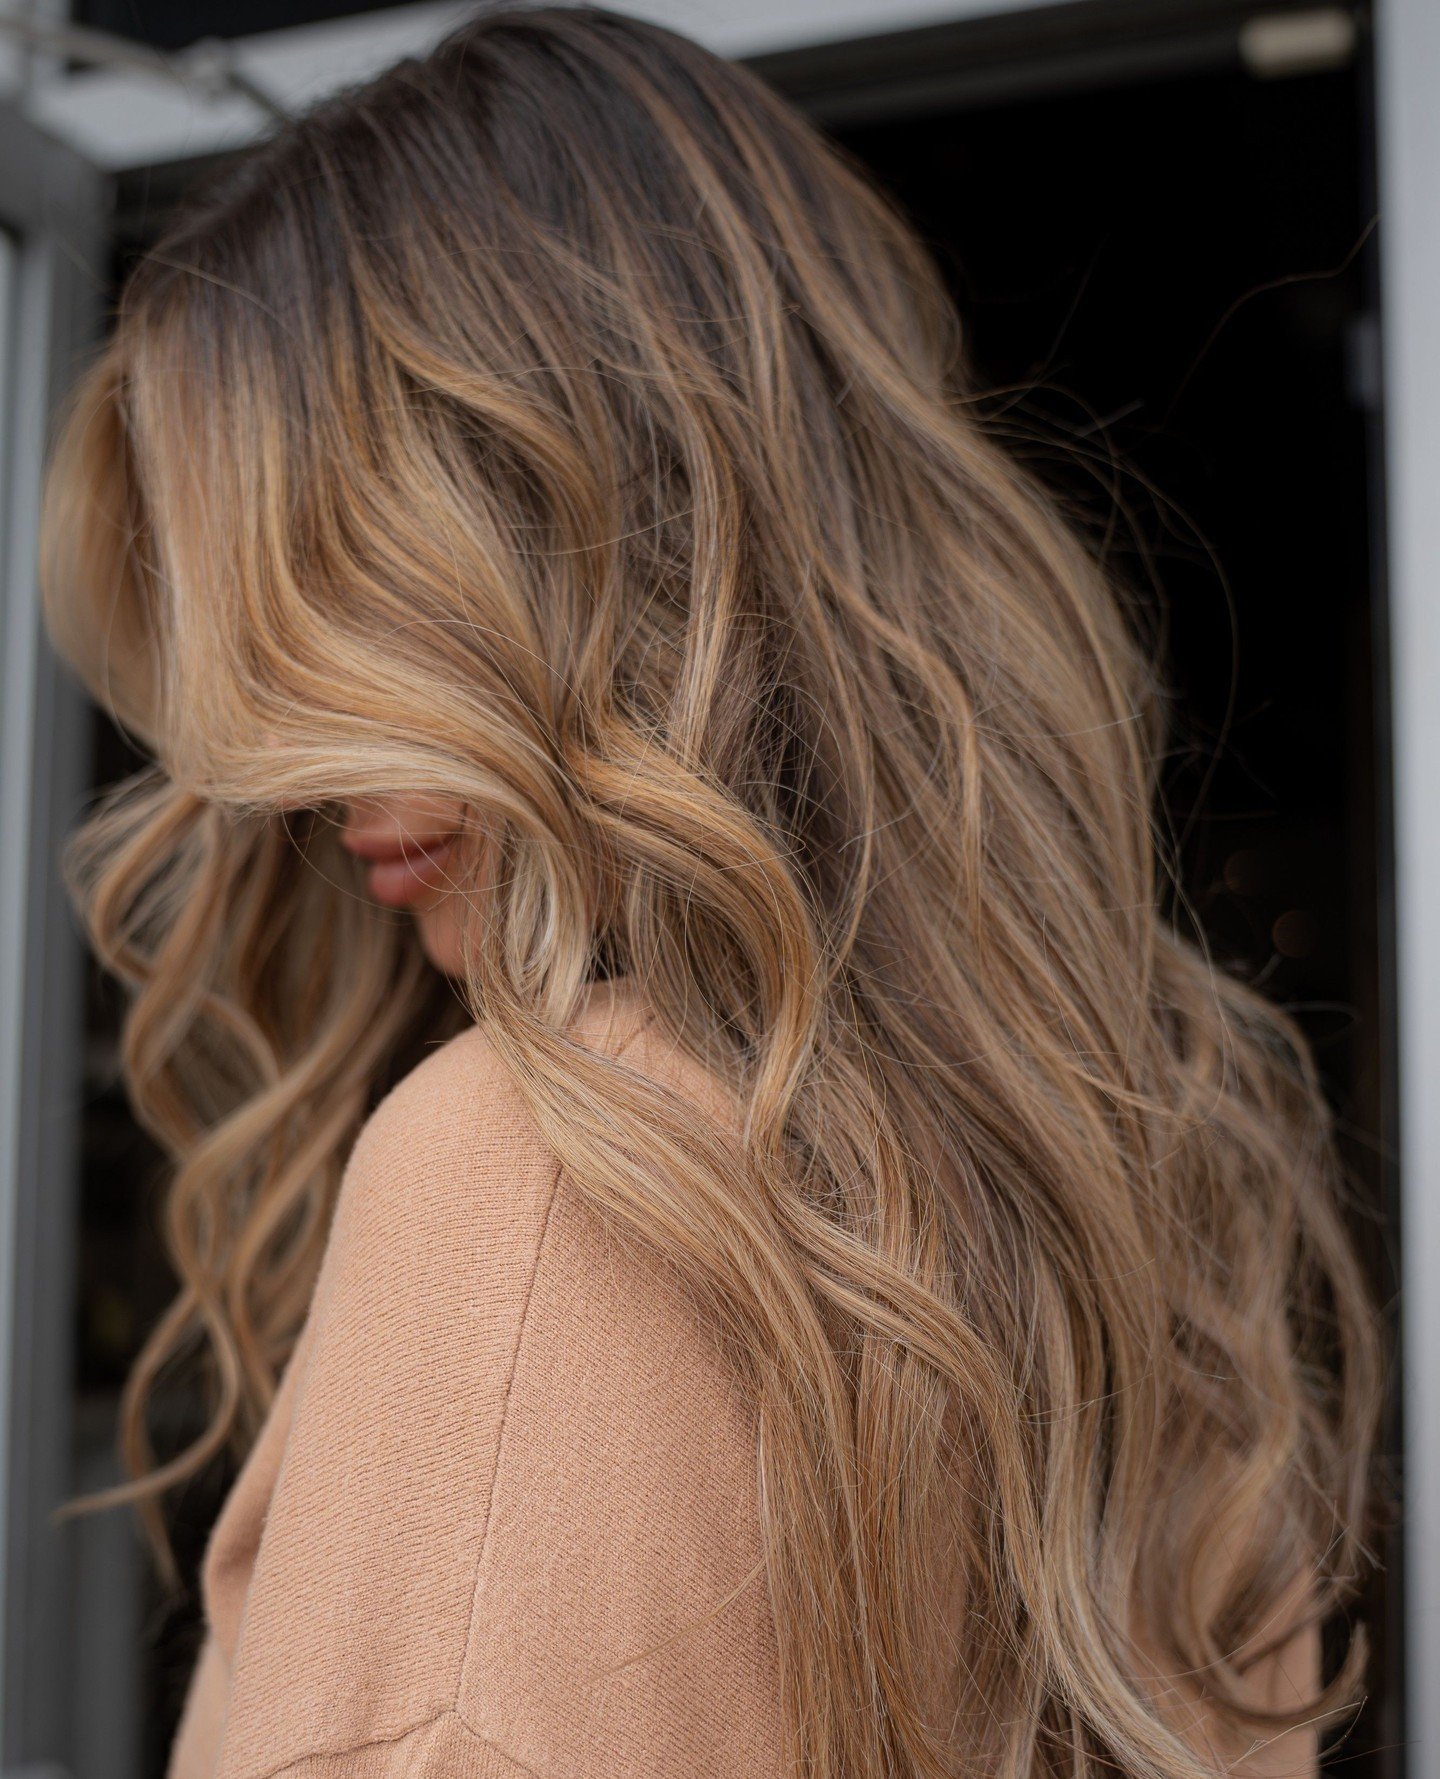 As if you needed a reason to keep a Volt visit in regular rotation&hellip; This stunning and smooth look is all thanks to regular Zuriel treatments post brightening ✨️⁠
.⁠
.⁠
.⁠
#hairsmoothing #hairtreatments #zuriel #goldwell